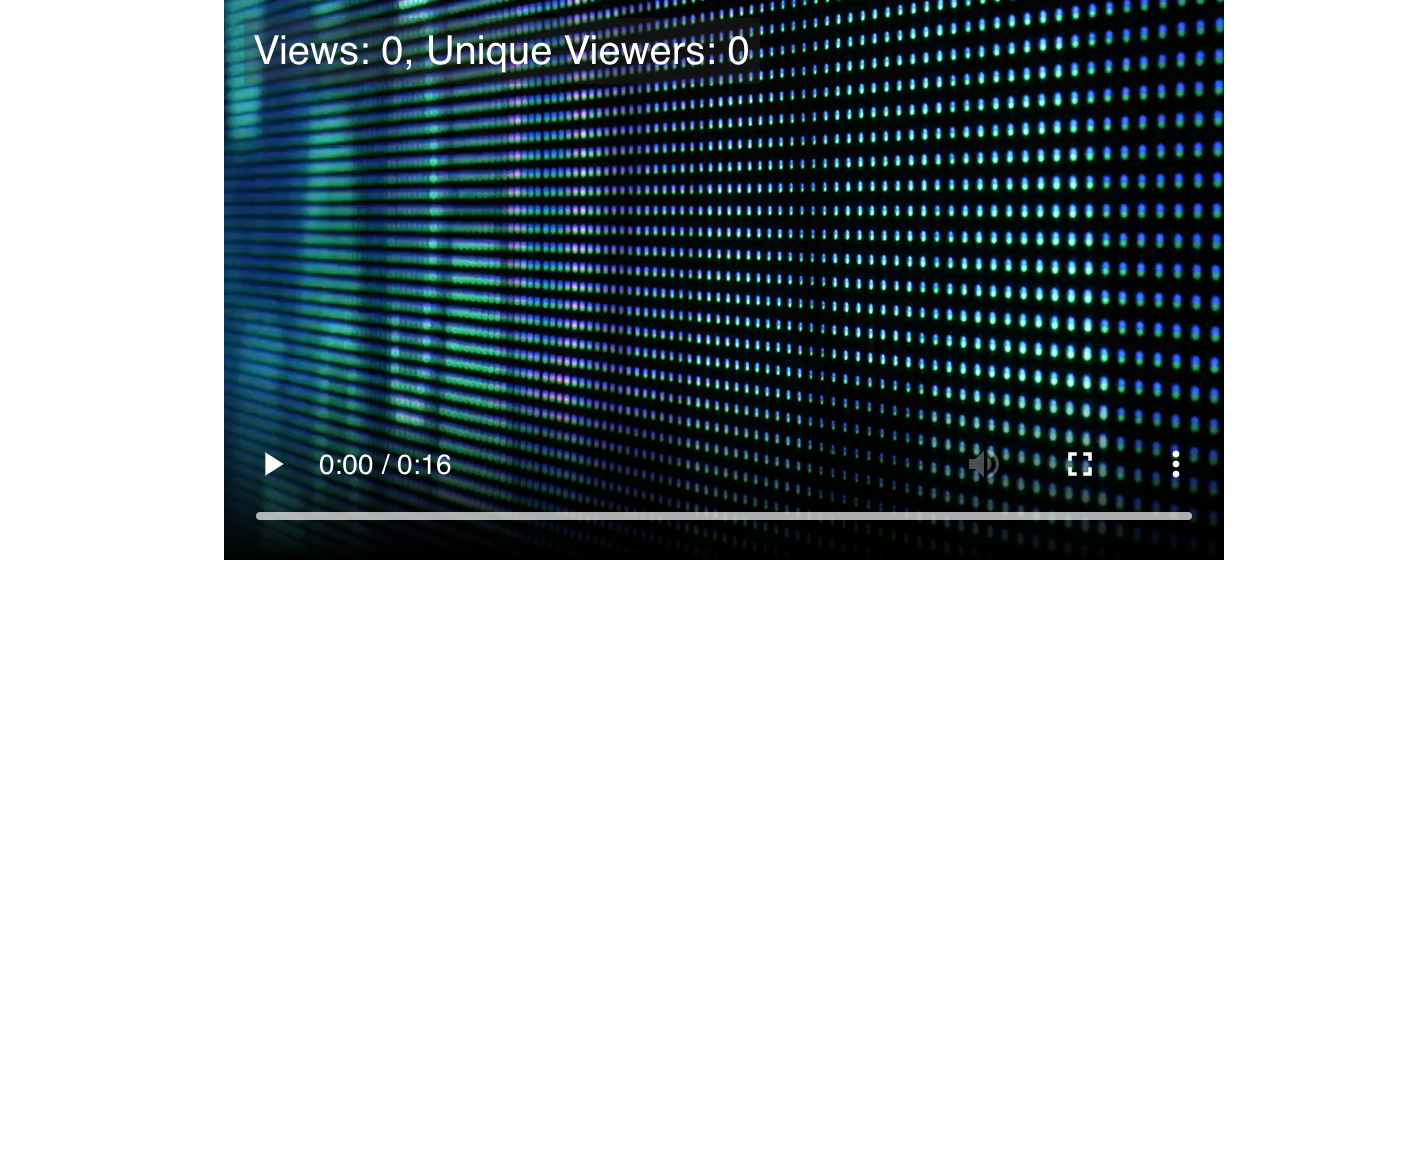 A screenshot showing the video in-app with an overlay that reads - "Views: 0, Unique Viewers: 0"